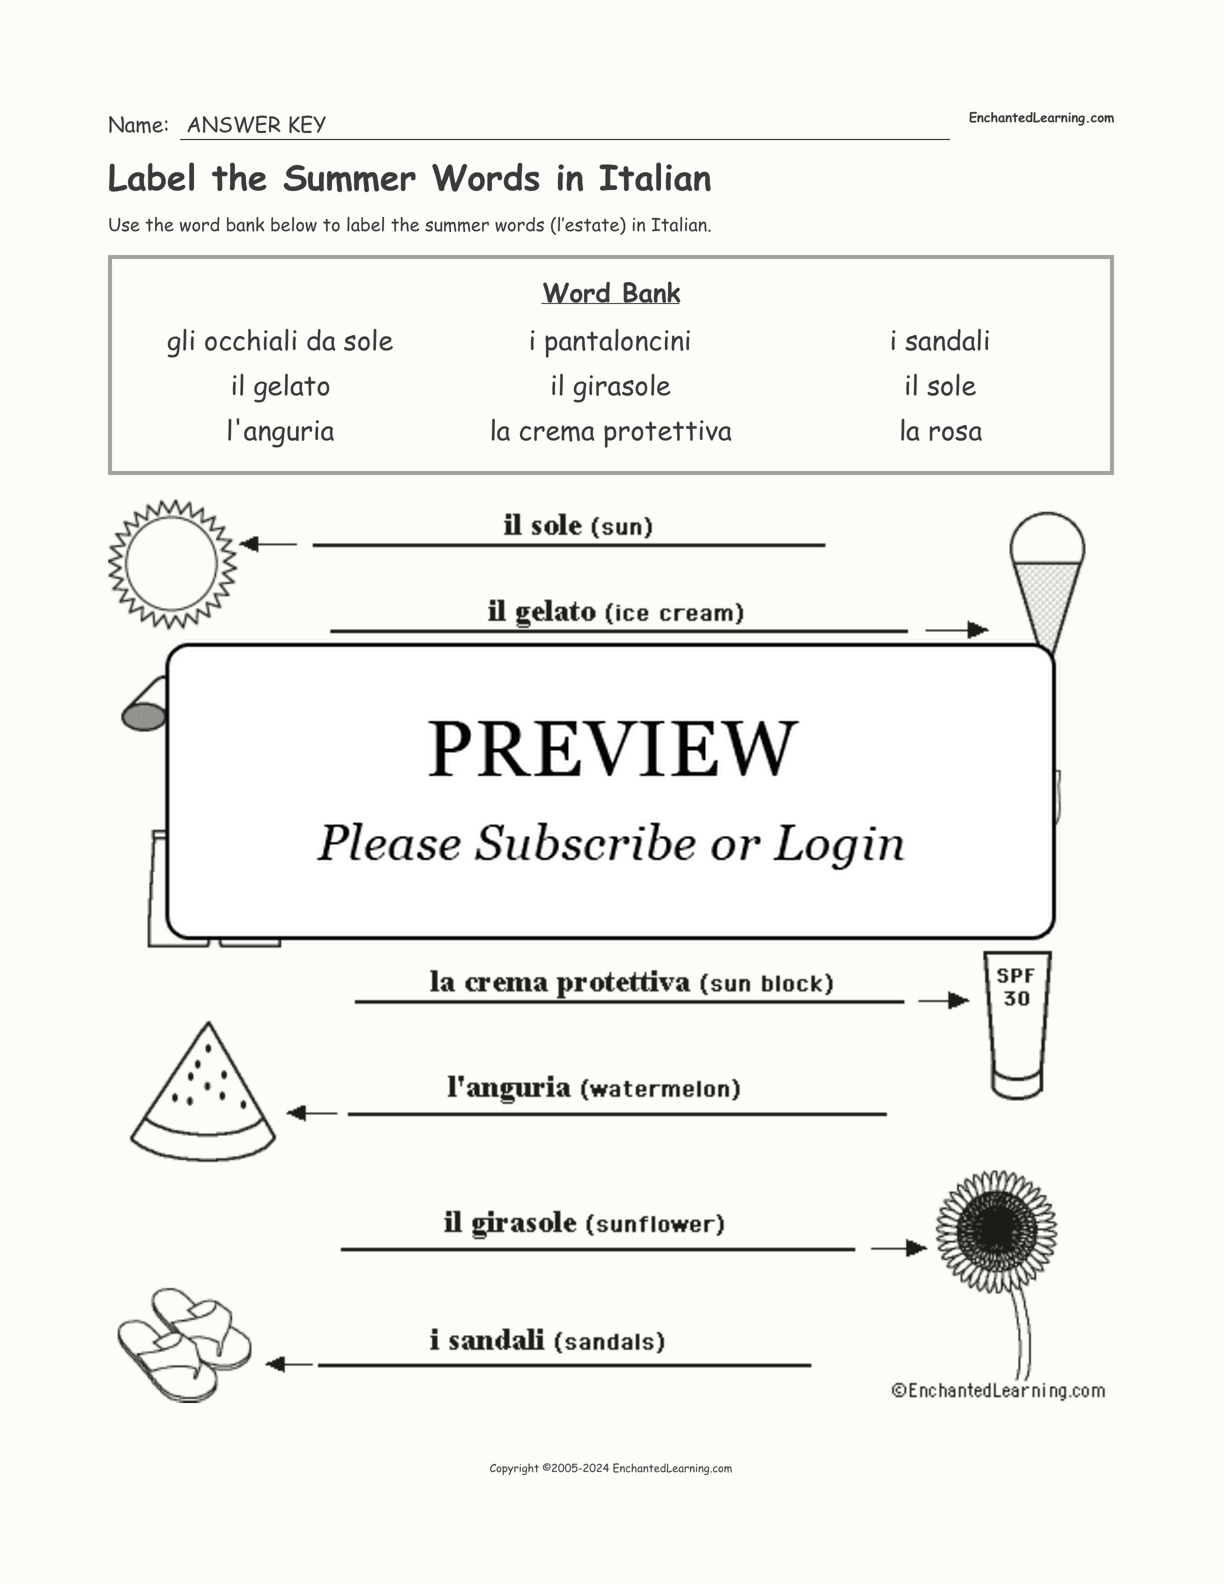 Label the Summer Words in Italian interactive worksheet page 2